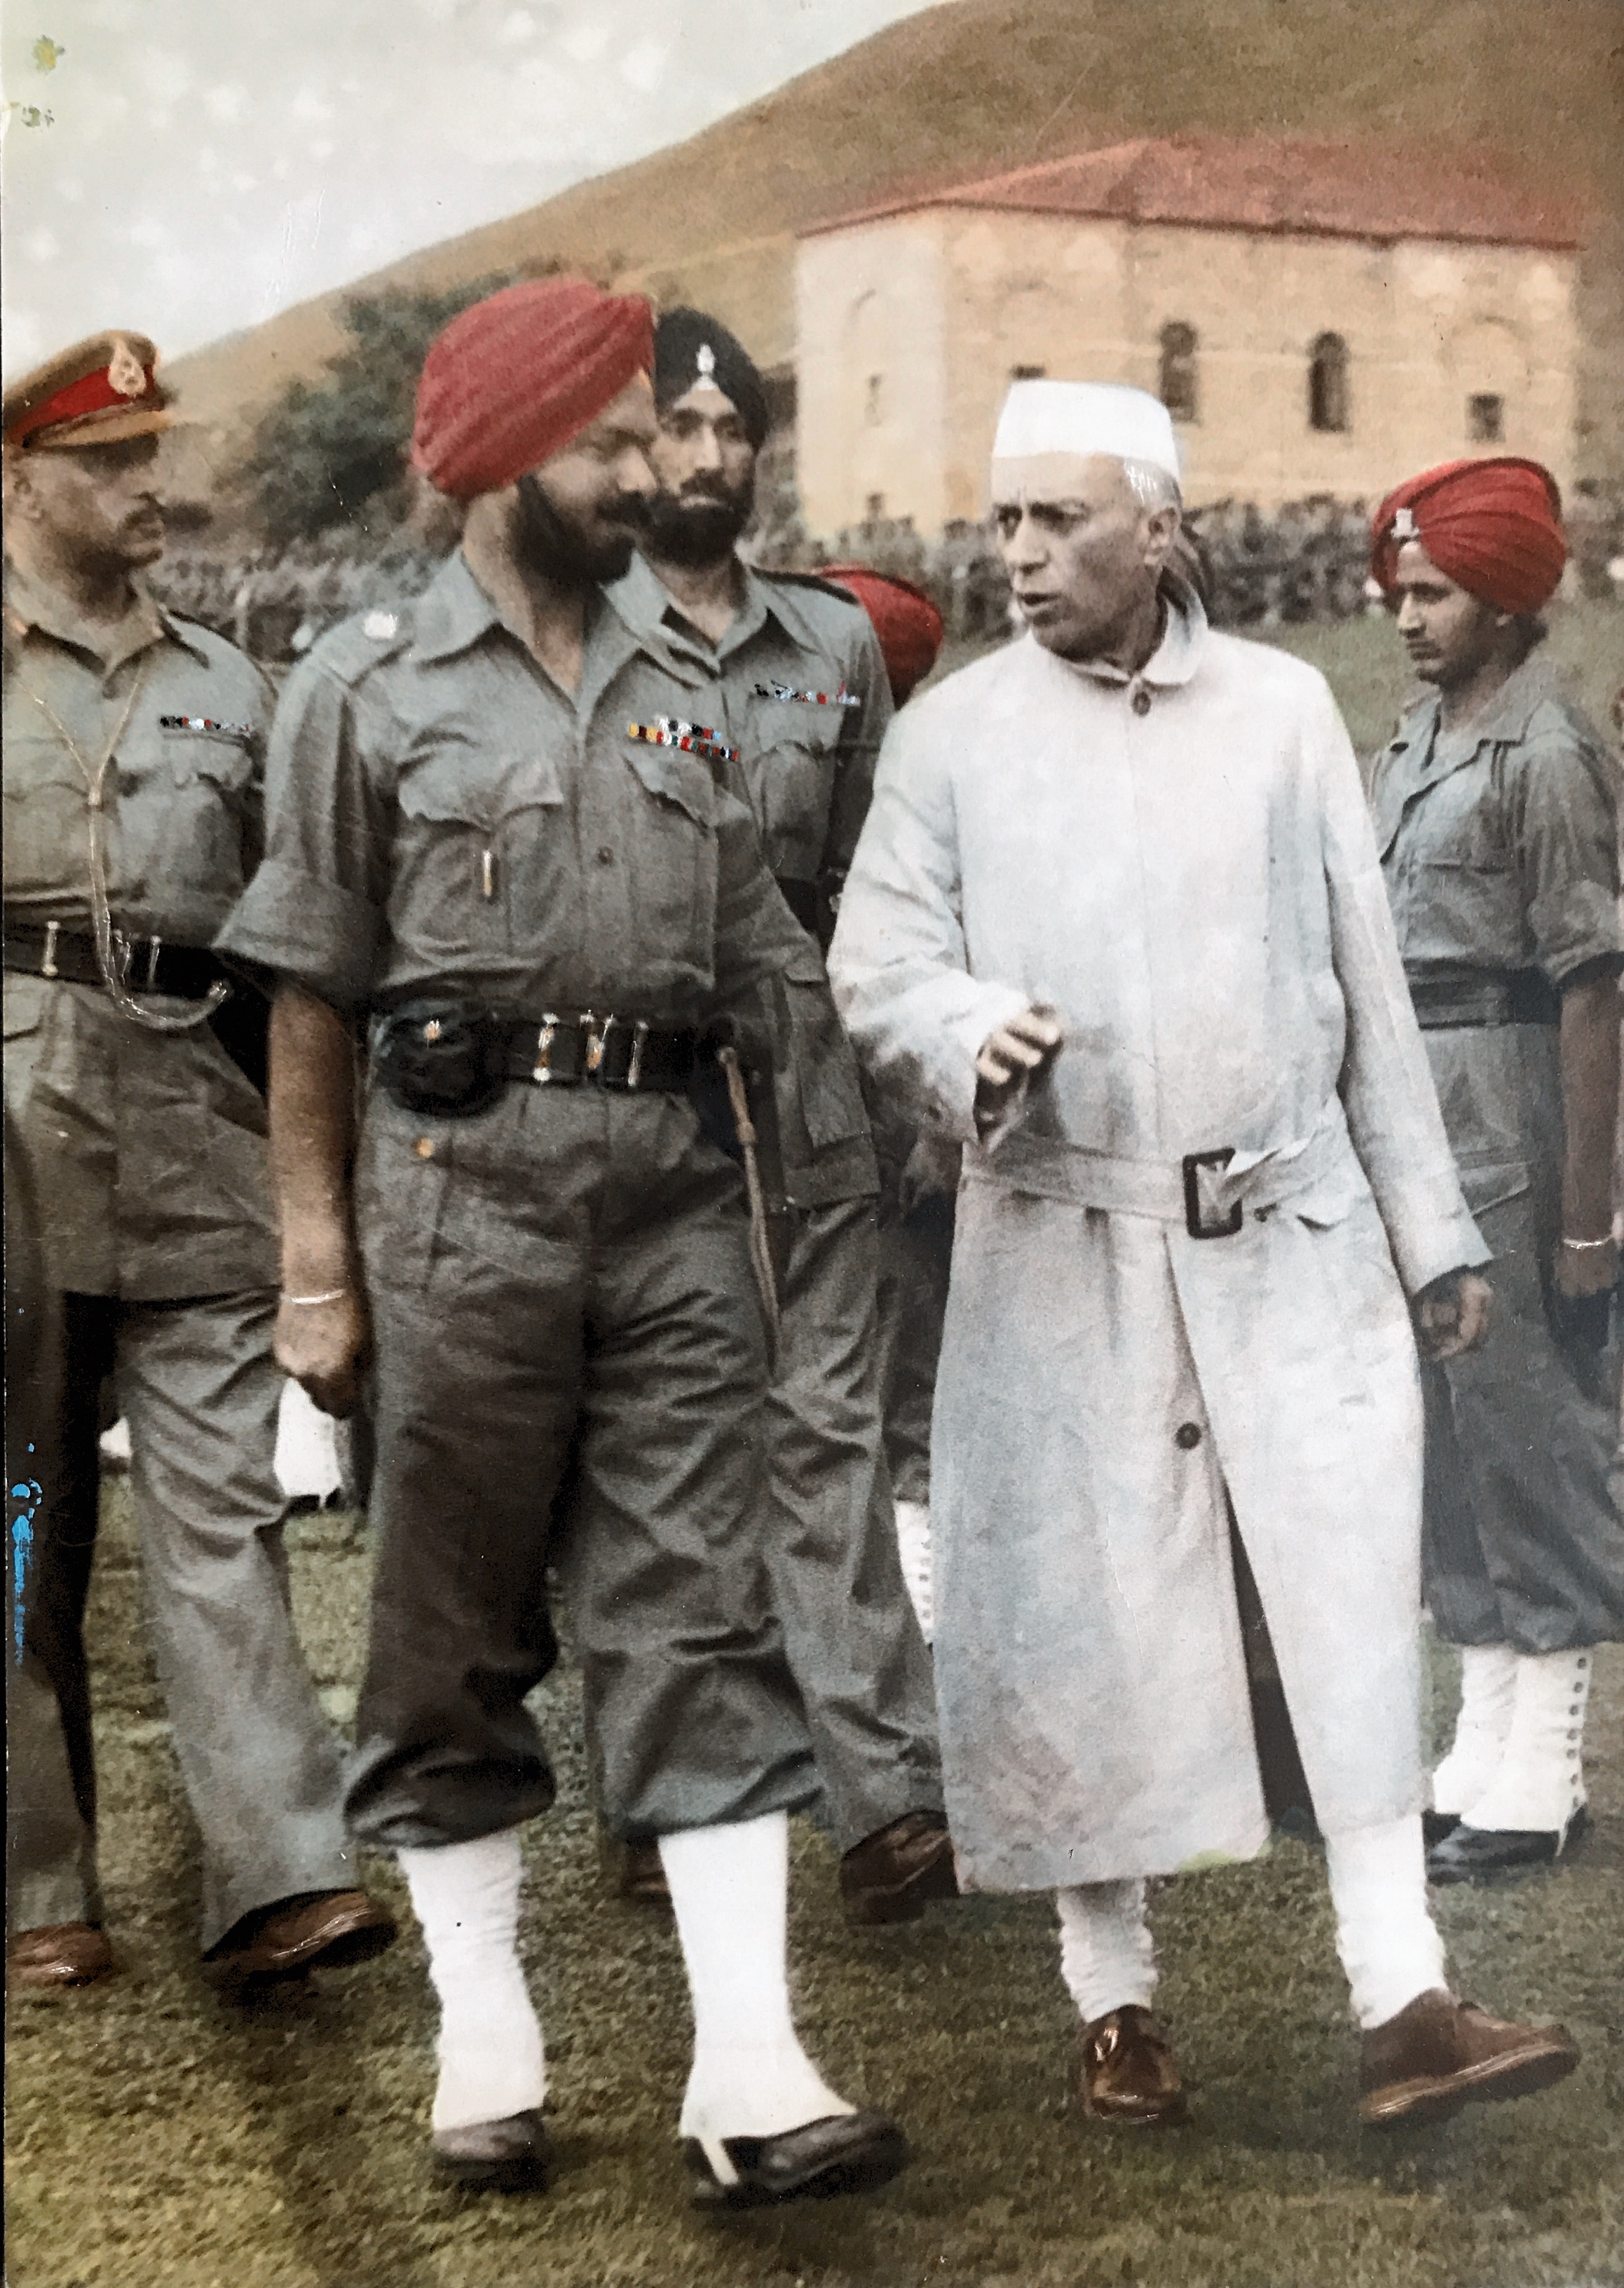 Guard of honour given by 1st Bn The Sikh Regt to the Prime Minister Shri Jawaharlal Nehru at Srinagar (J&K) on 10 May 1948. With the Prime Minister is Major Harwant Singh M.C. and in the rear are Maj Gen KS Thimayya DSO, GOC 19 infantry Division and Lt Col Harbakhsh Singh CO 1  Sikh.
This picture was taken by Preco Studio Srinagar.